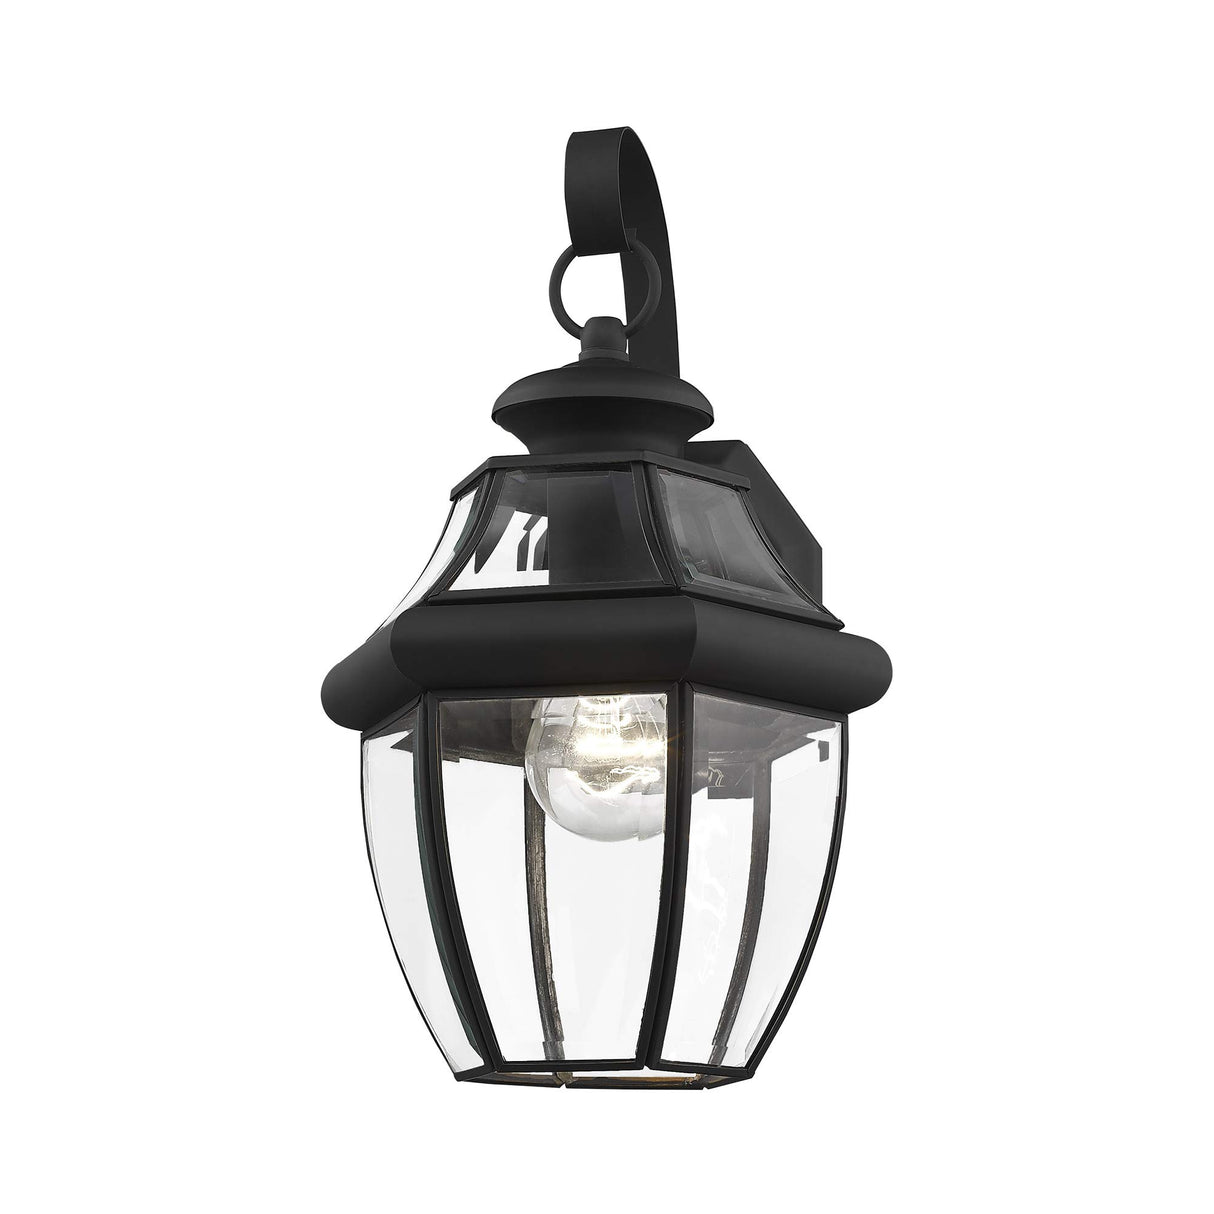 Livex Lighting 2151-04 Monterey 1 Light Outdoor Black Finish Solid Brass Wall Lantern with Clear Beveled Glass, 13" x 8.5" x 8.25"